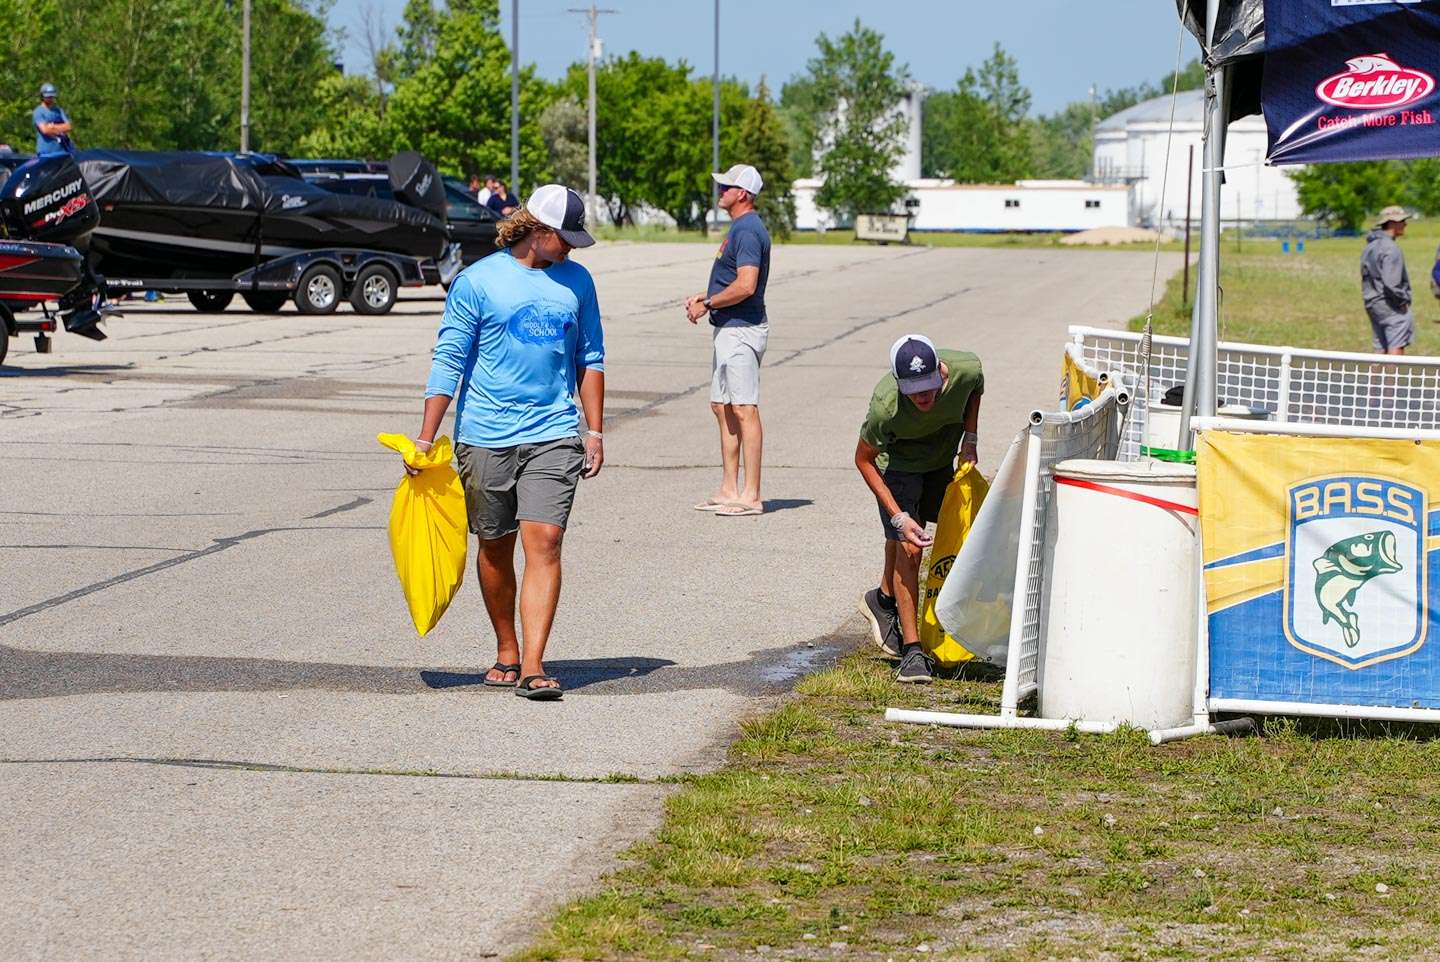 Check out the sights from registration of the Mossy Oak Fishing Bassmaster High School Series at Saginaw Bay presented by Academy Sports + Outdoors!